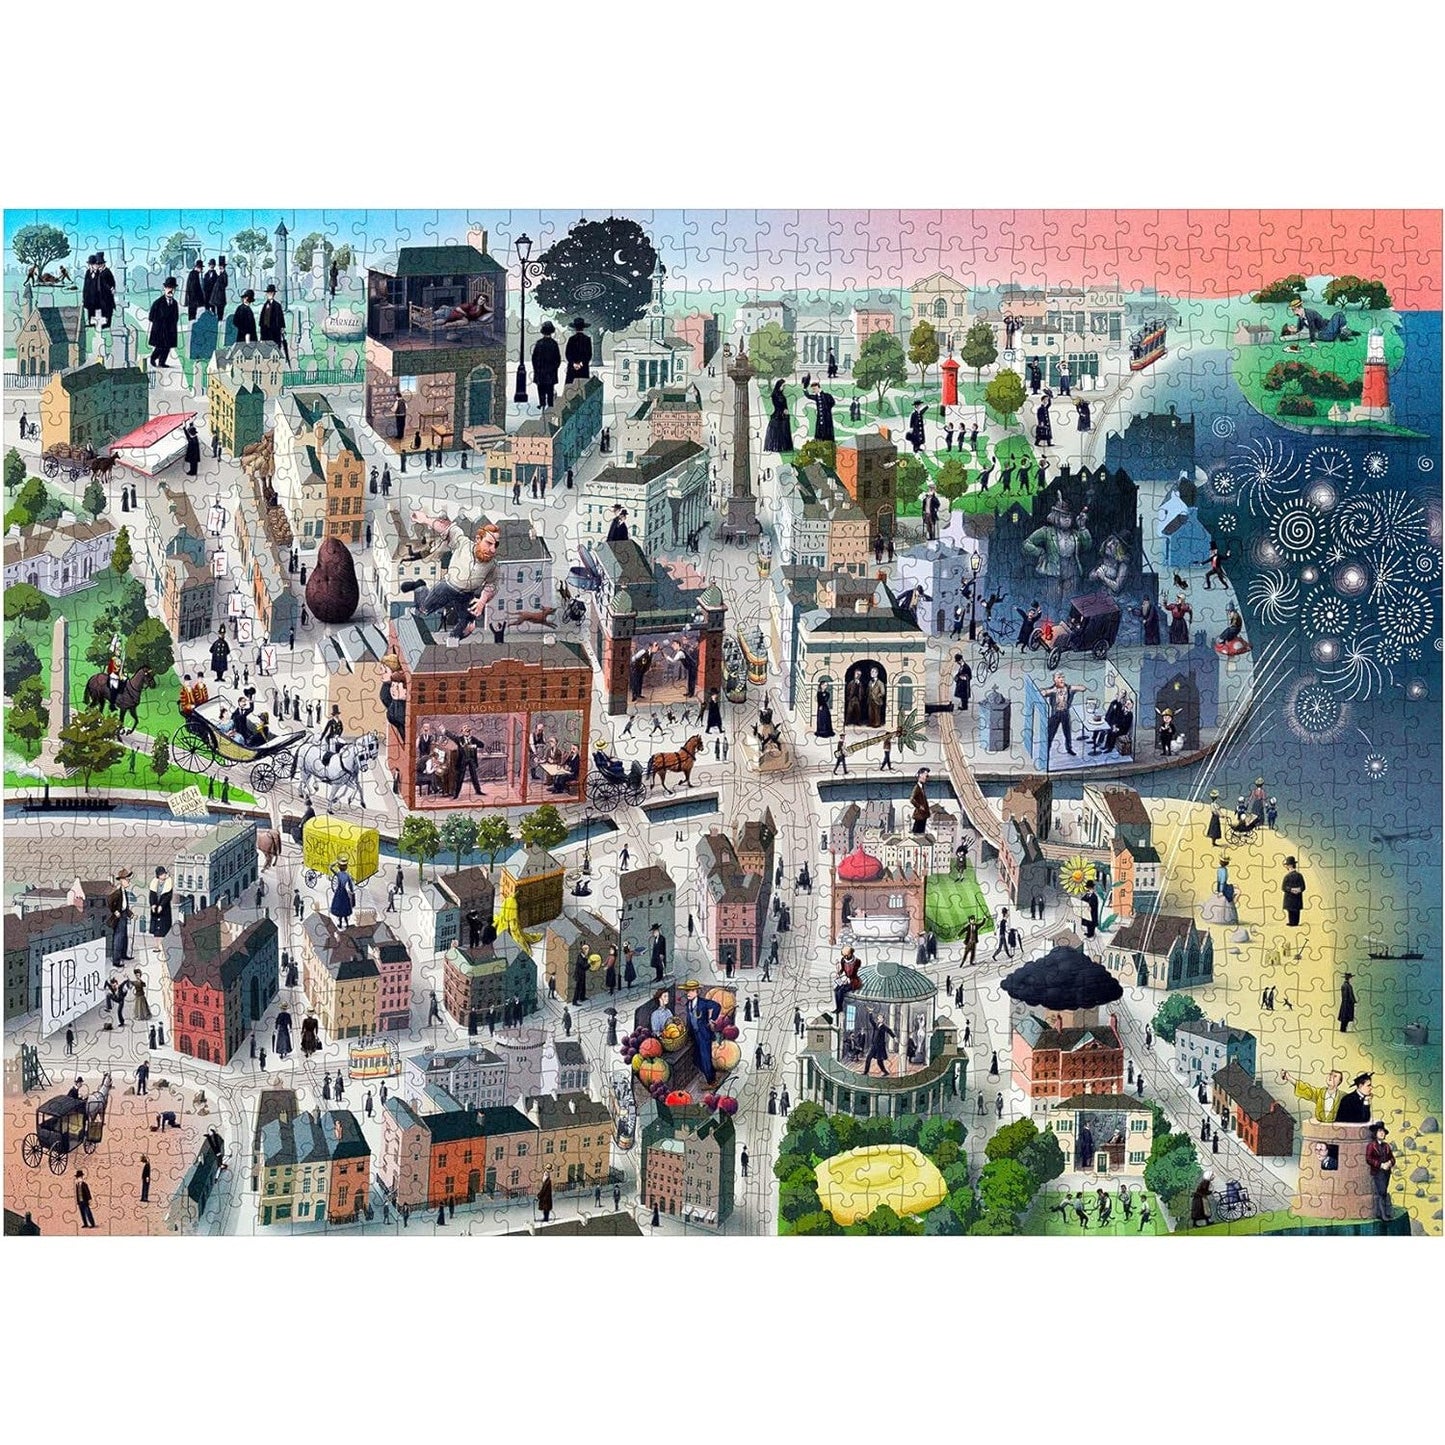 The World of James Joyce Puzzle 1000 Piece Jigsaw Puzzle Laurence King